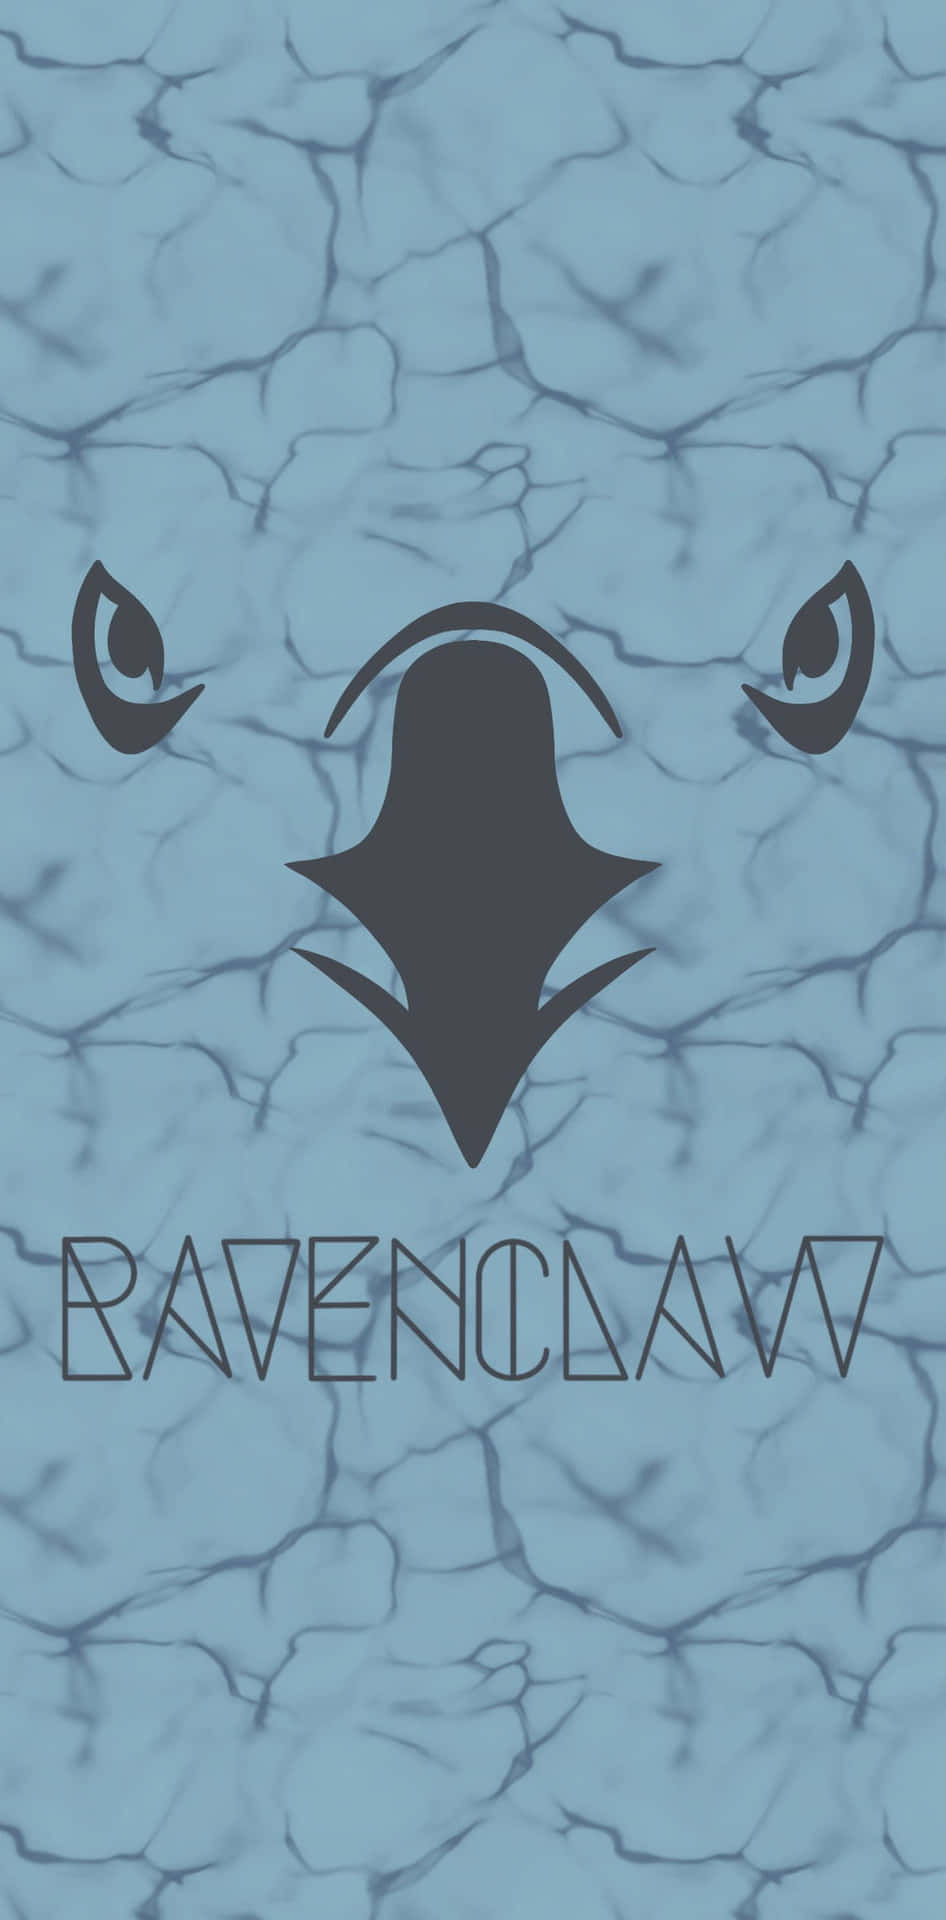 "Wise like a Ravenclaw". Wallpaper